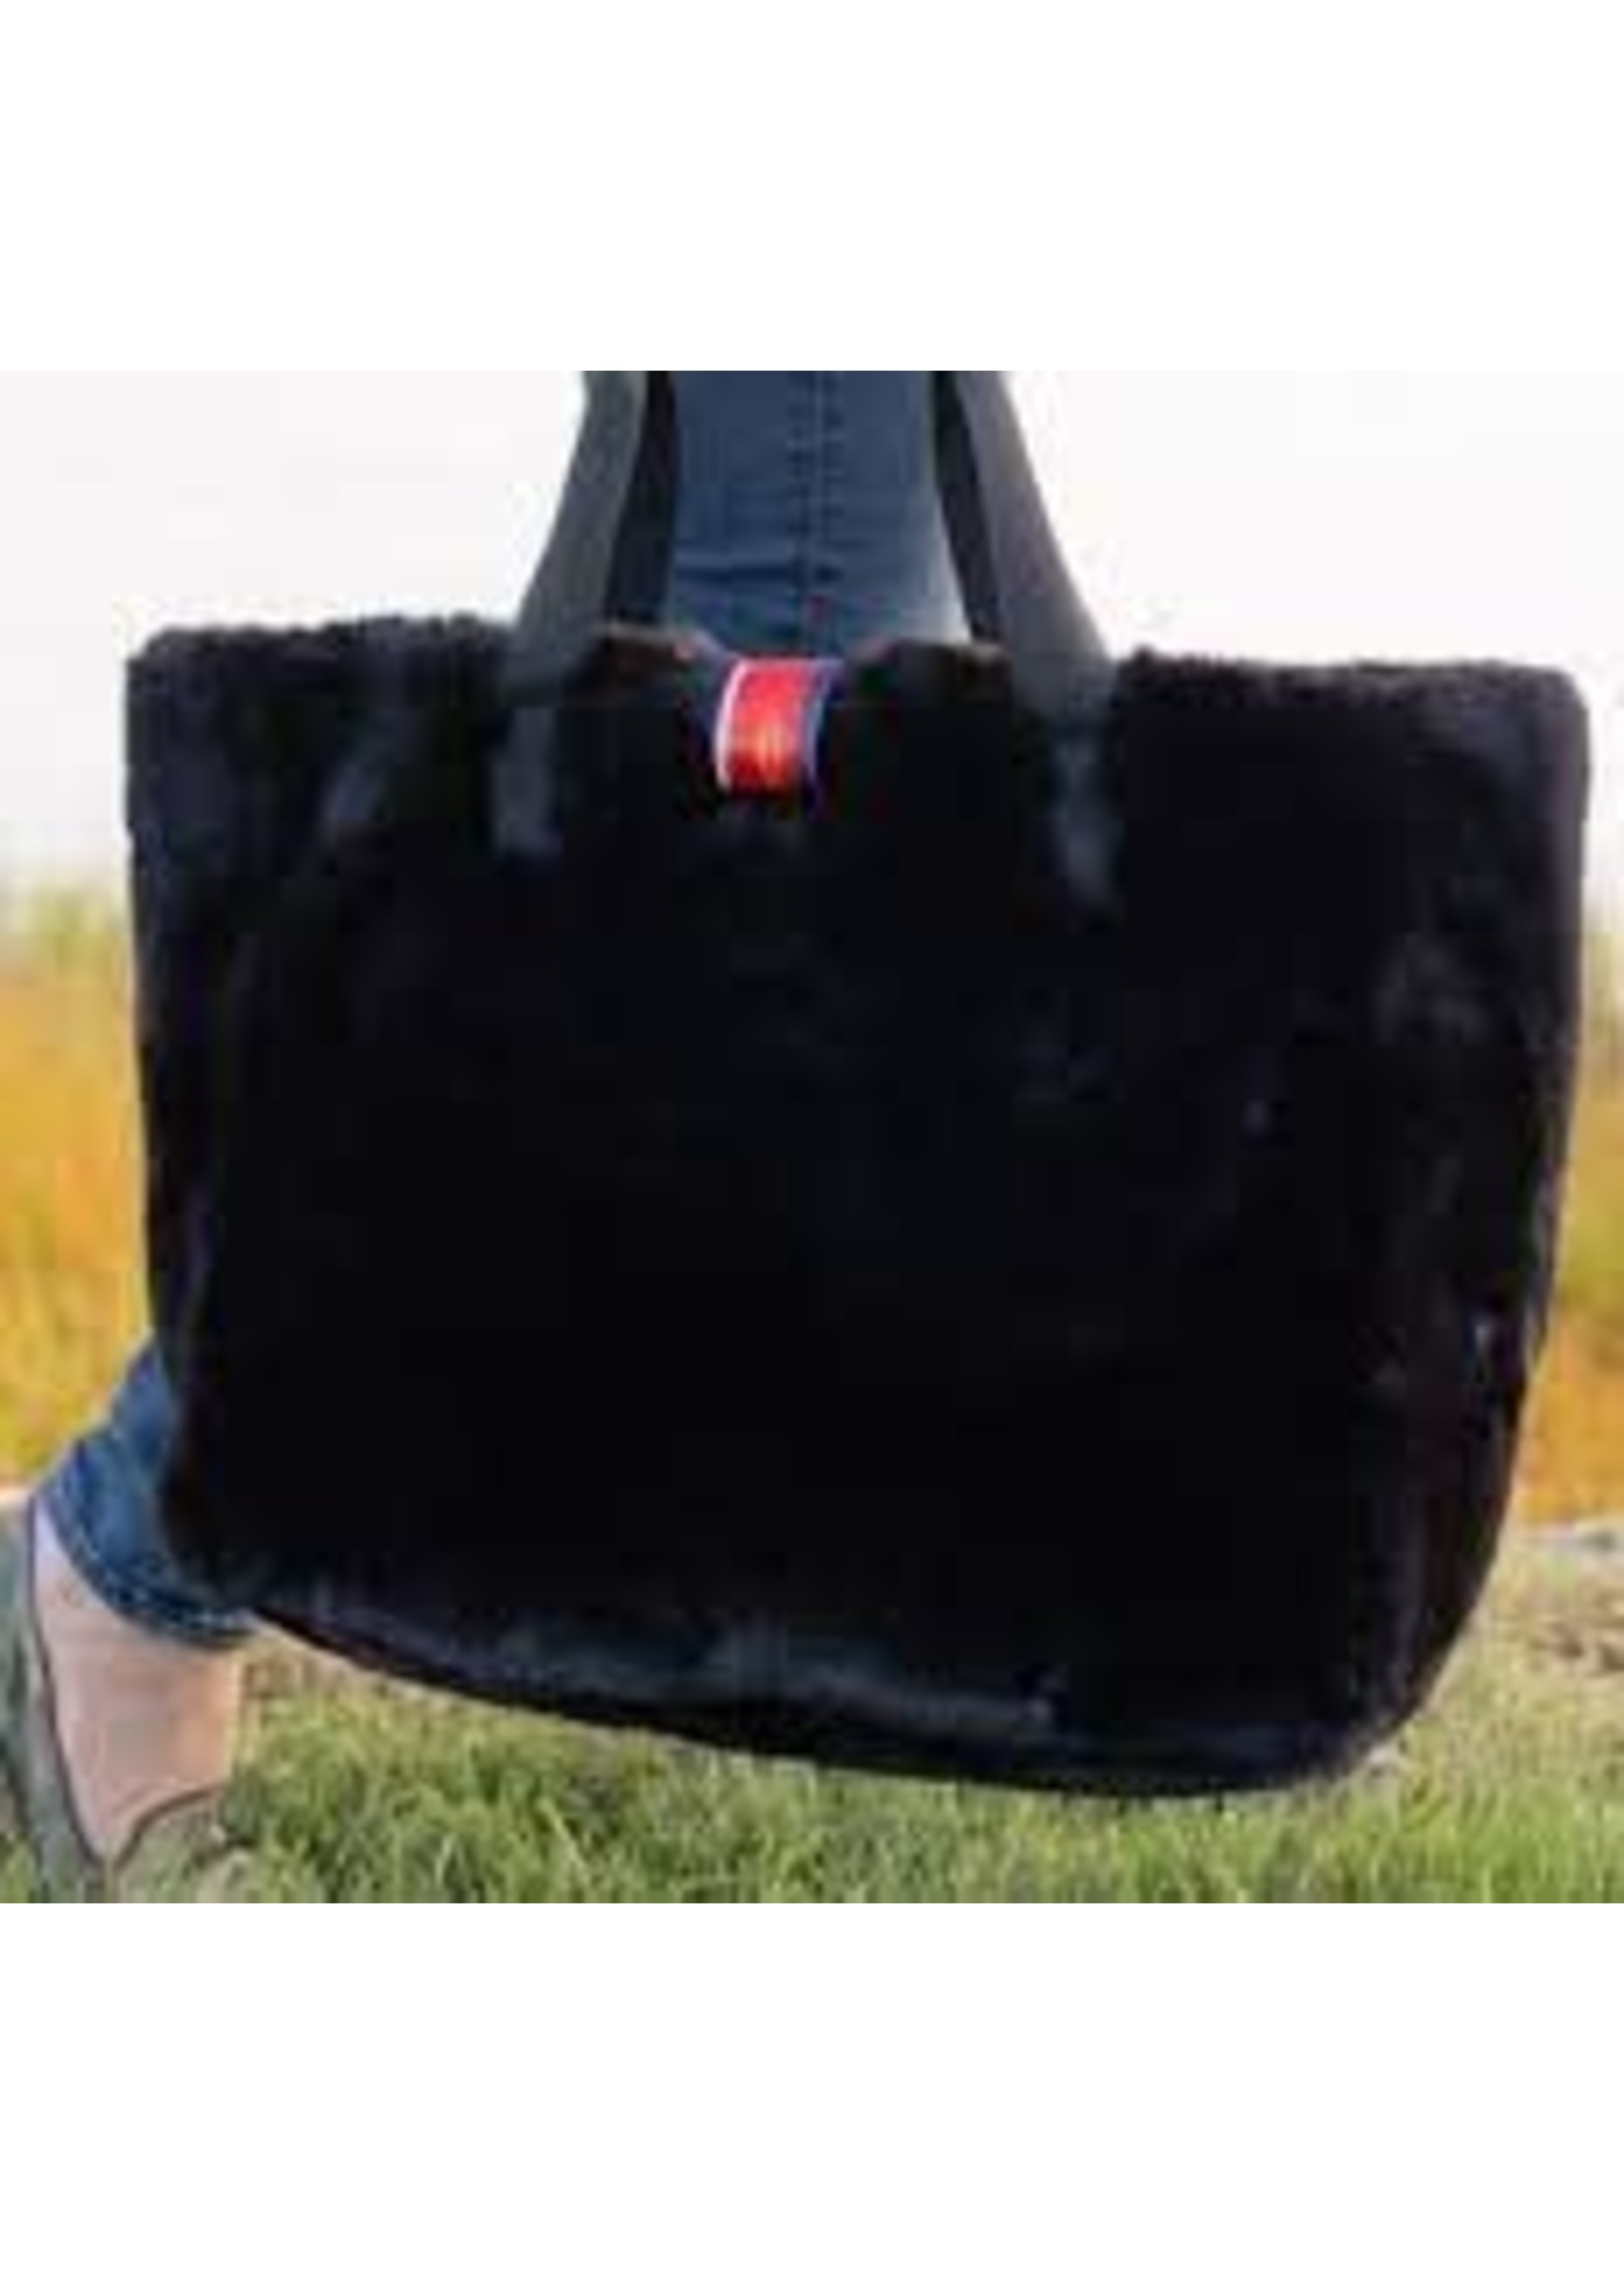 PRETTY RUGGED GEAR REVERSIBLE OVERSIZED FUR TOTE